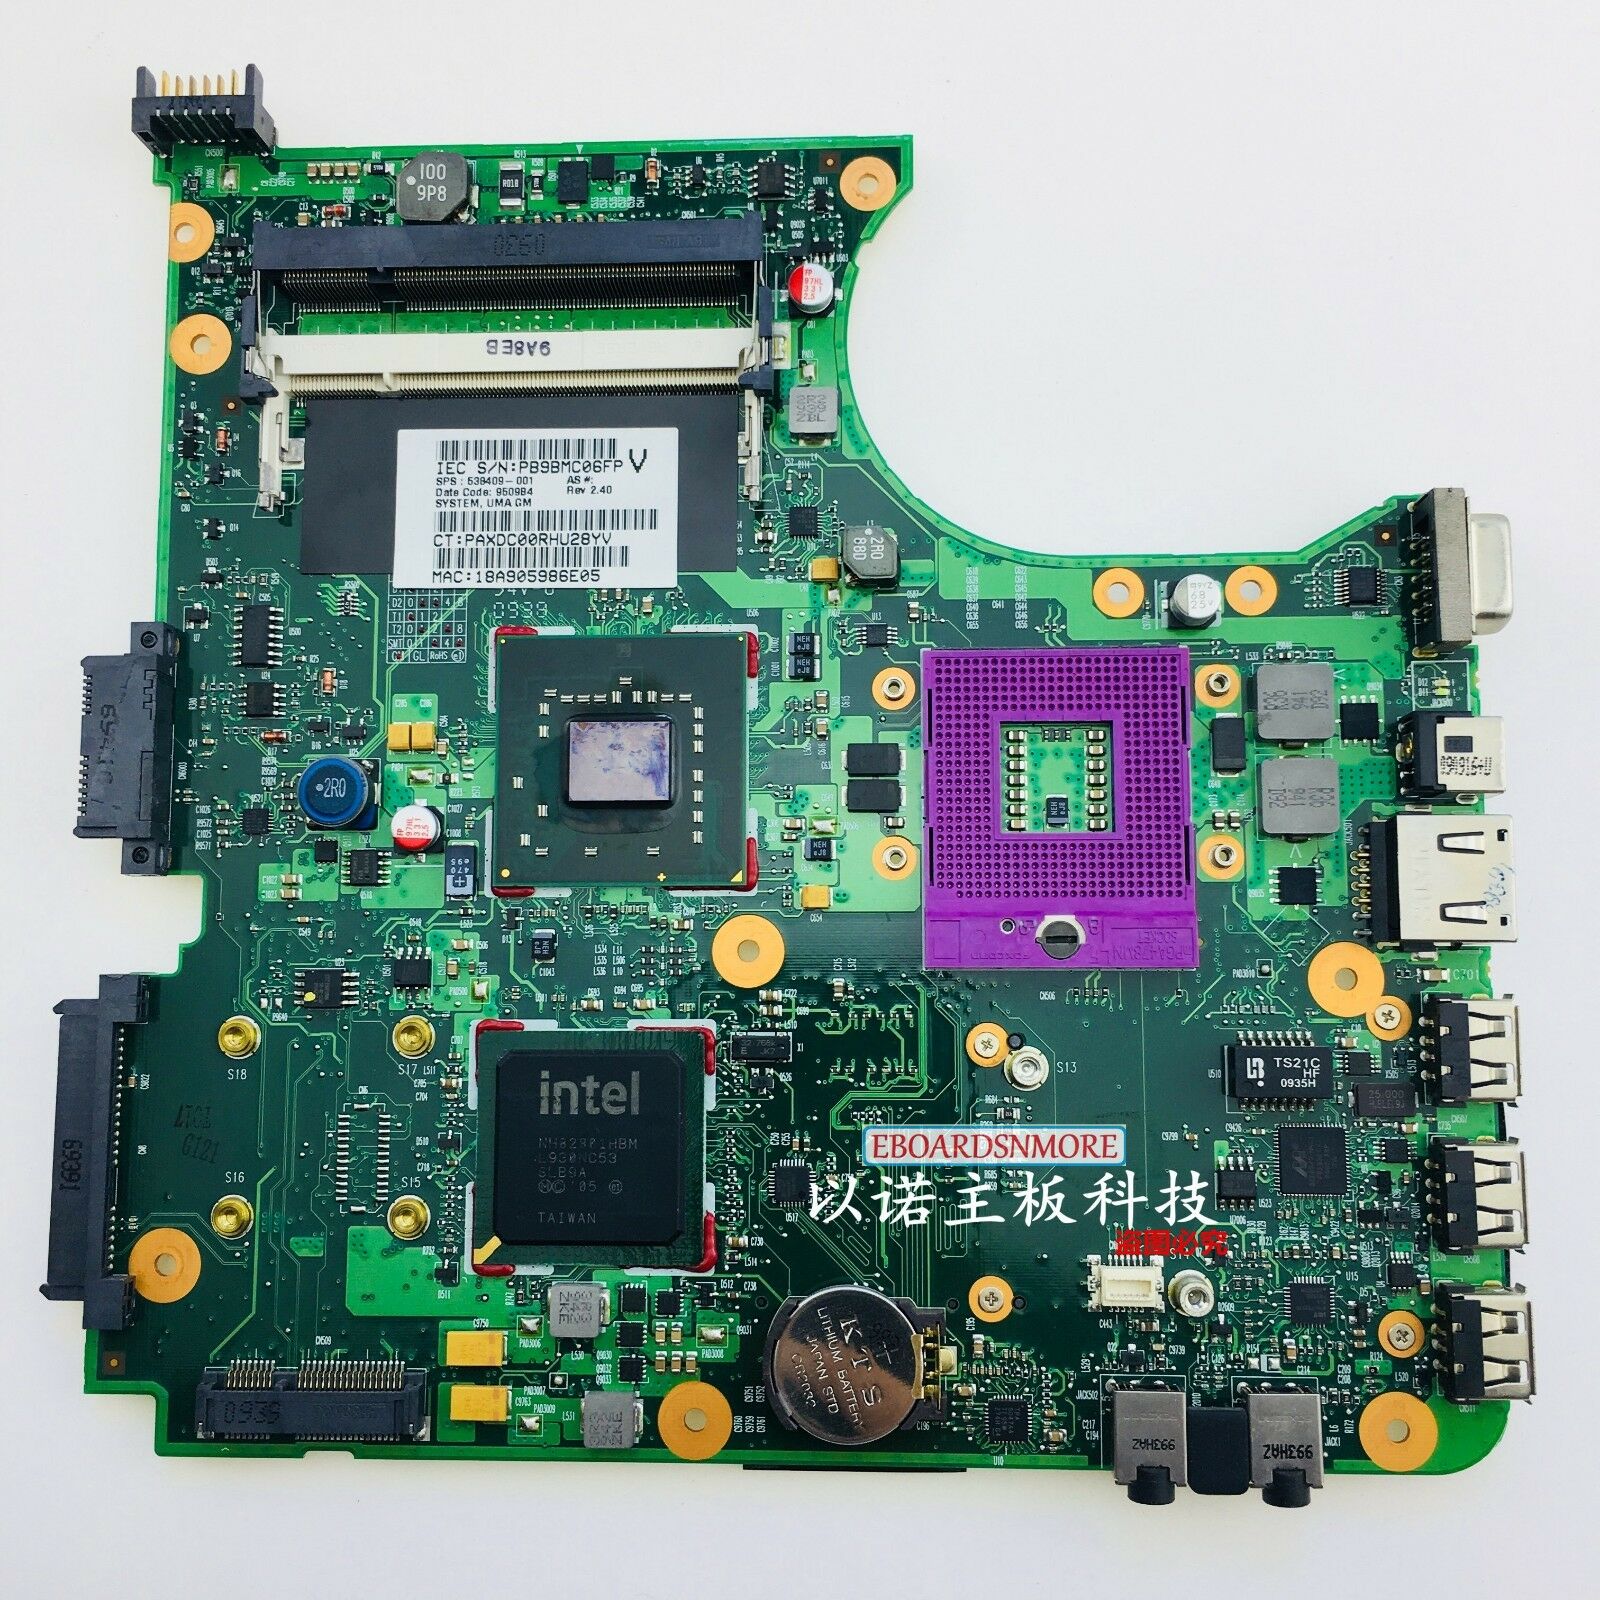 538409-001 Intel MOTHERBOARD for HP Compaq 510 610 Series LAPTOP A Compatible CPU Brand: Intel Features: On